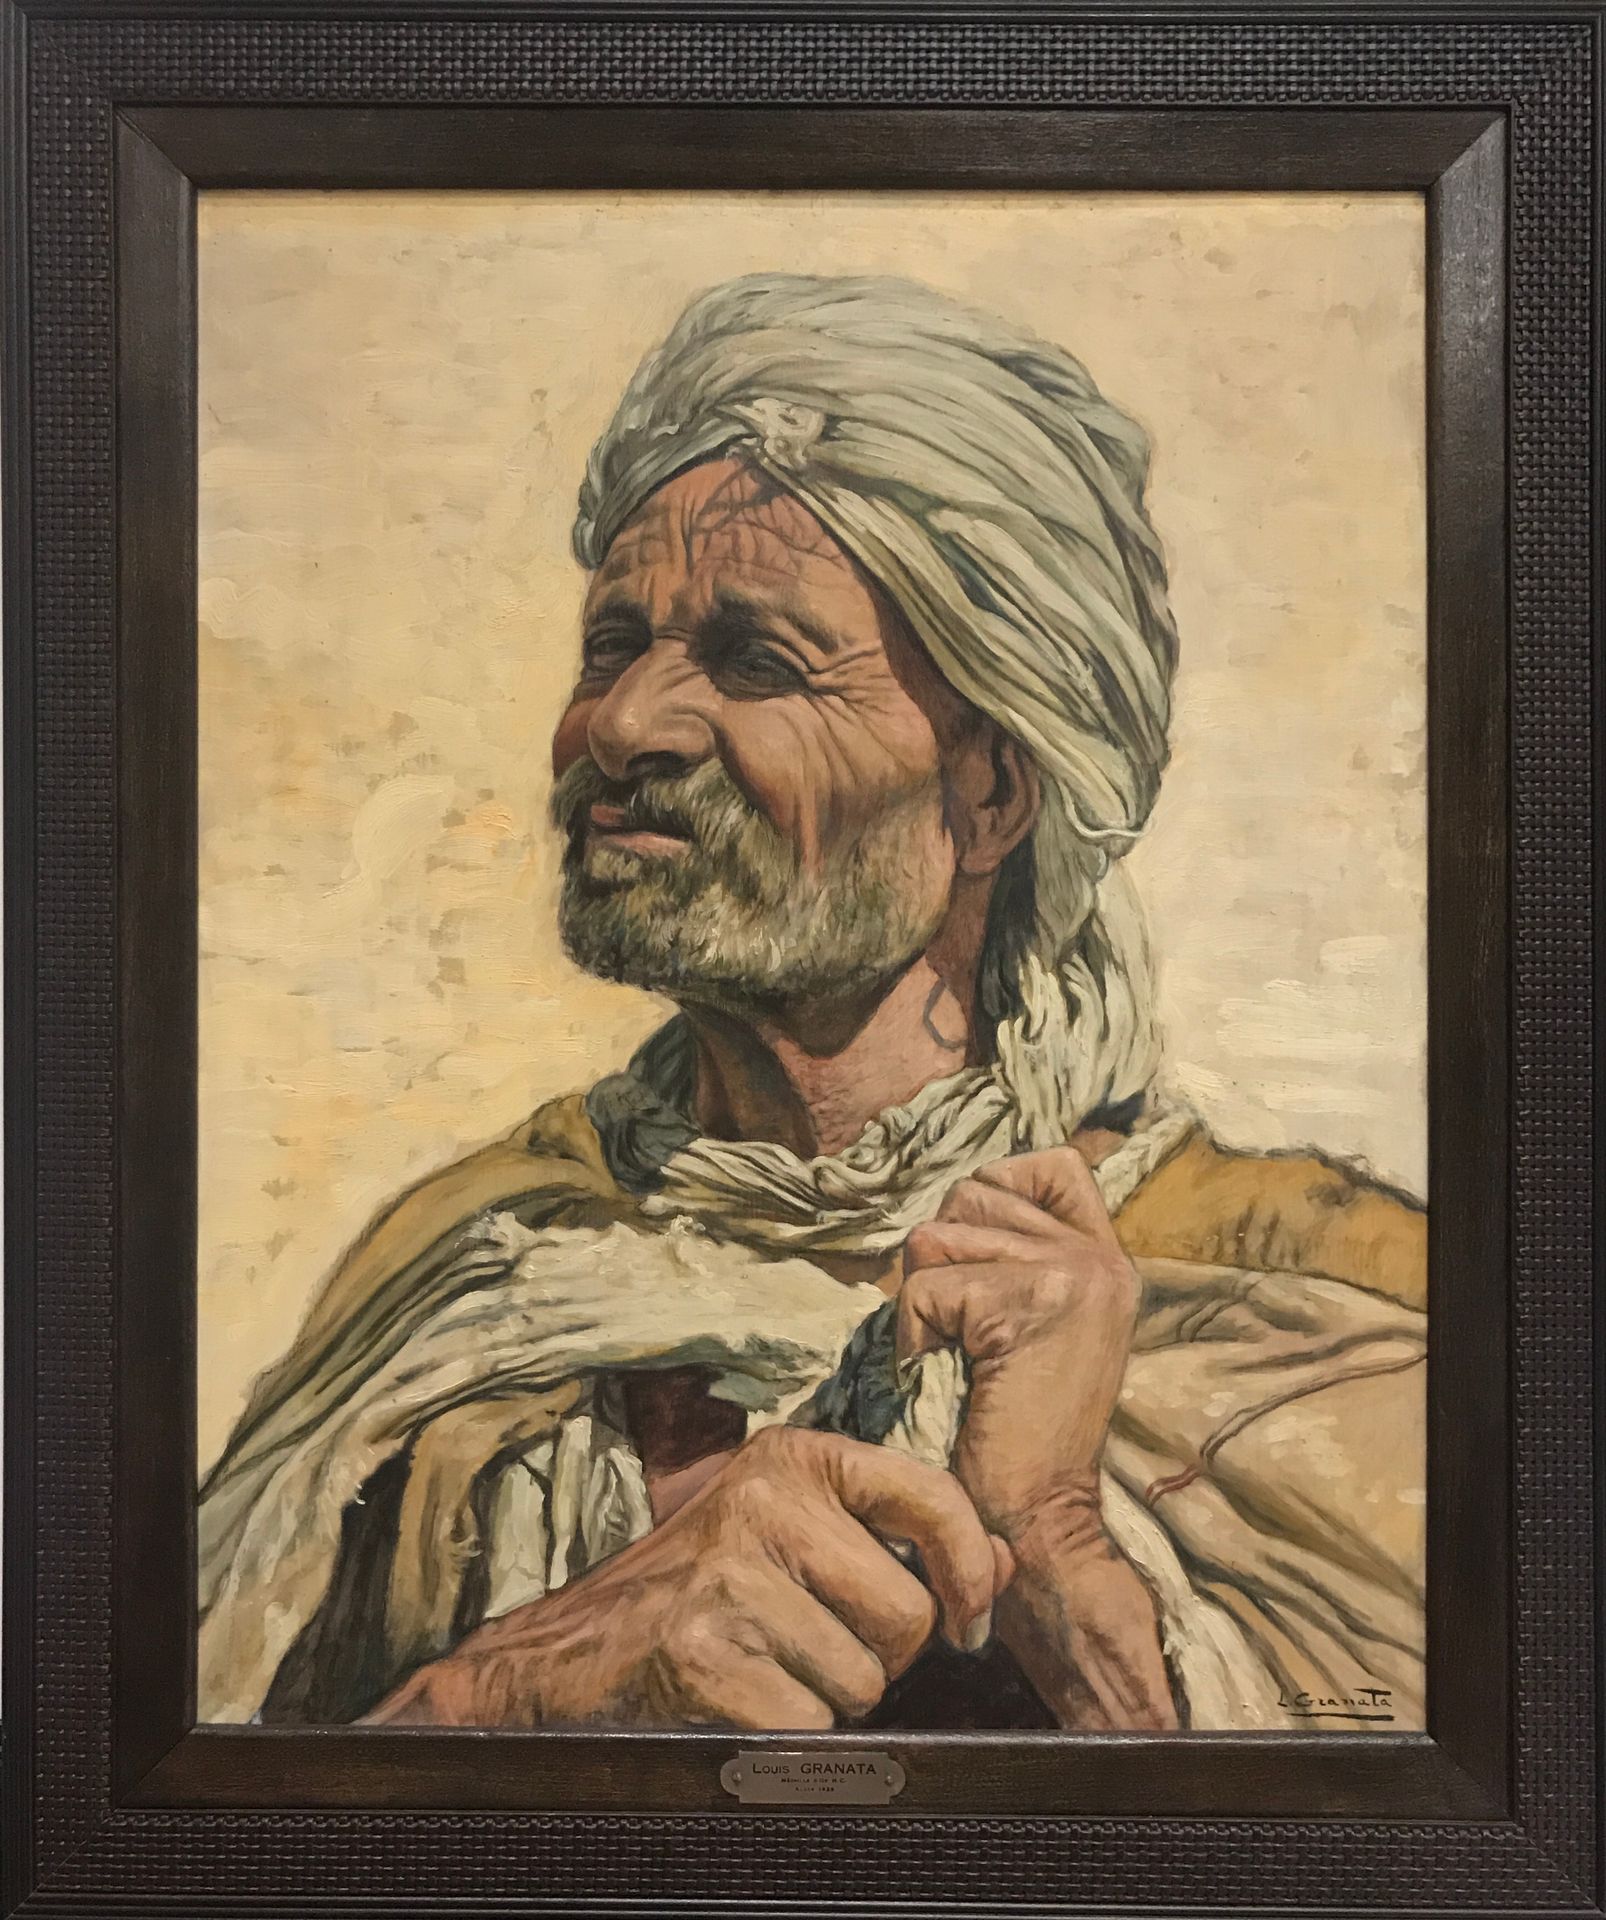 Null Louis GRANATA 1901-1964

"The Berber". 

Oil on panel. 

Signed lower right&hellip;